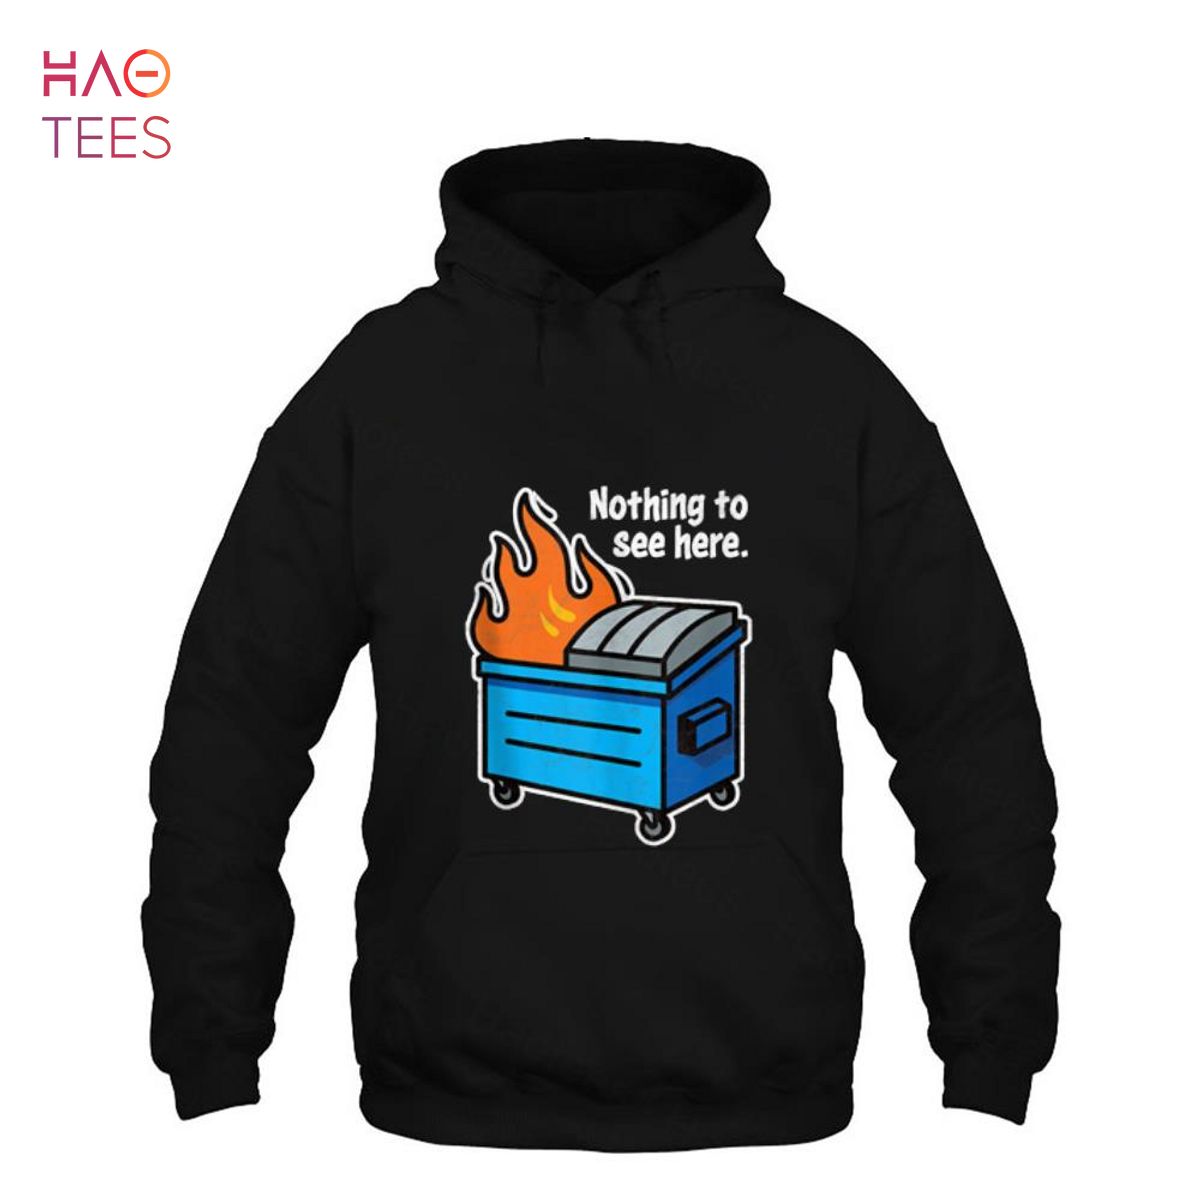 NOTHING TO SEE HERE - funny retro dumpster on fire sarcastic Shirt